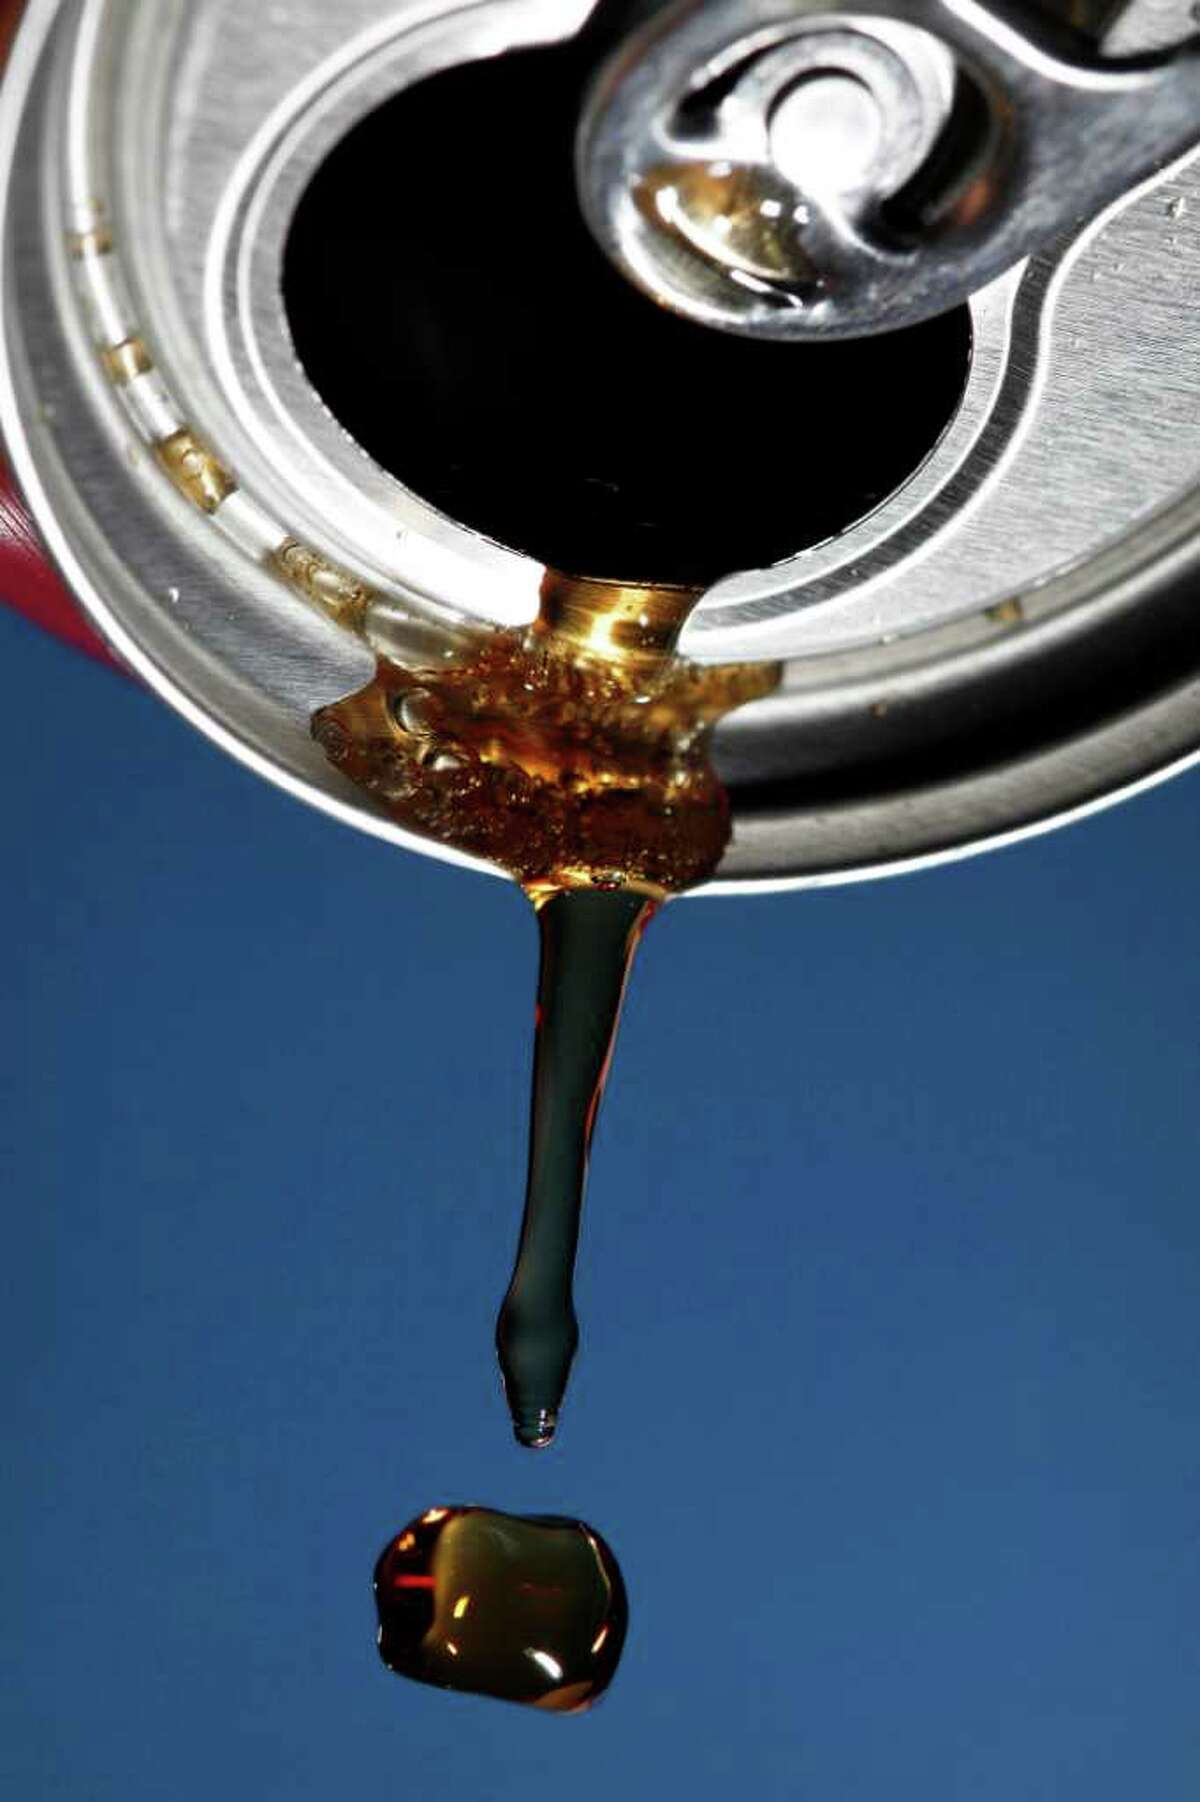 This photo illustration shows soda being poured from a can Thursday, Sept. 15, 2011, in Philadelphia. A recent attempt by the corn industry to change the name of a widely used but increasingly controversial sweetener was misleading and could have robbed consumers of important information, a top official at the Food and Drug Administration said in documents obtained by The Associated Press.(AP Photo/Matt Rourke)